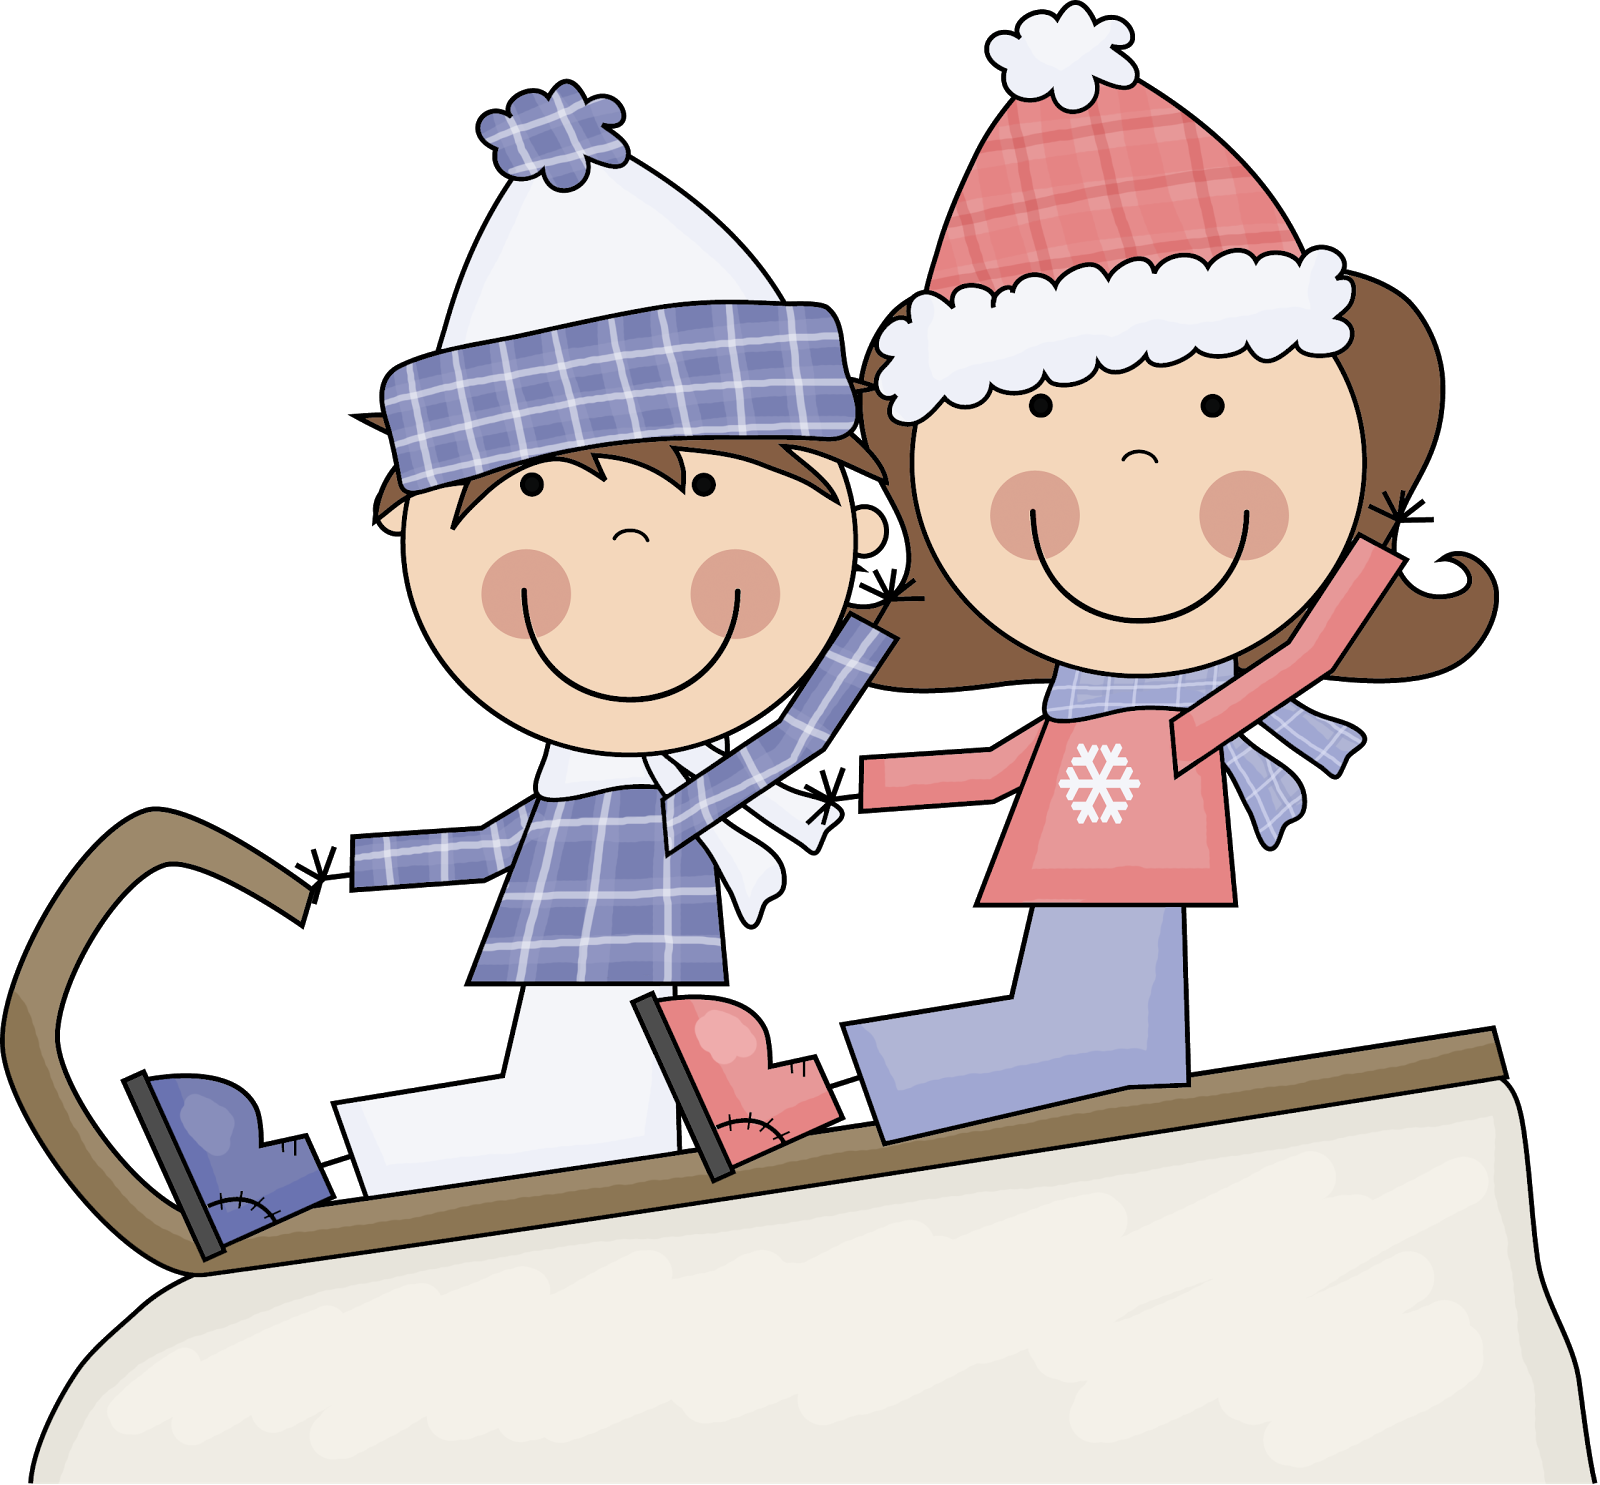 playing in the snow clipart - Clip Art Library